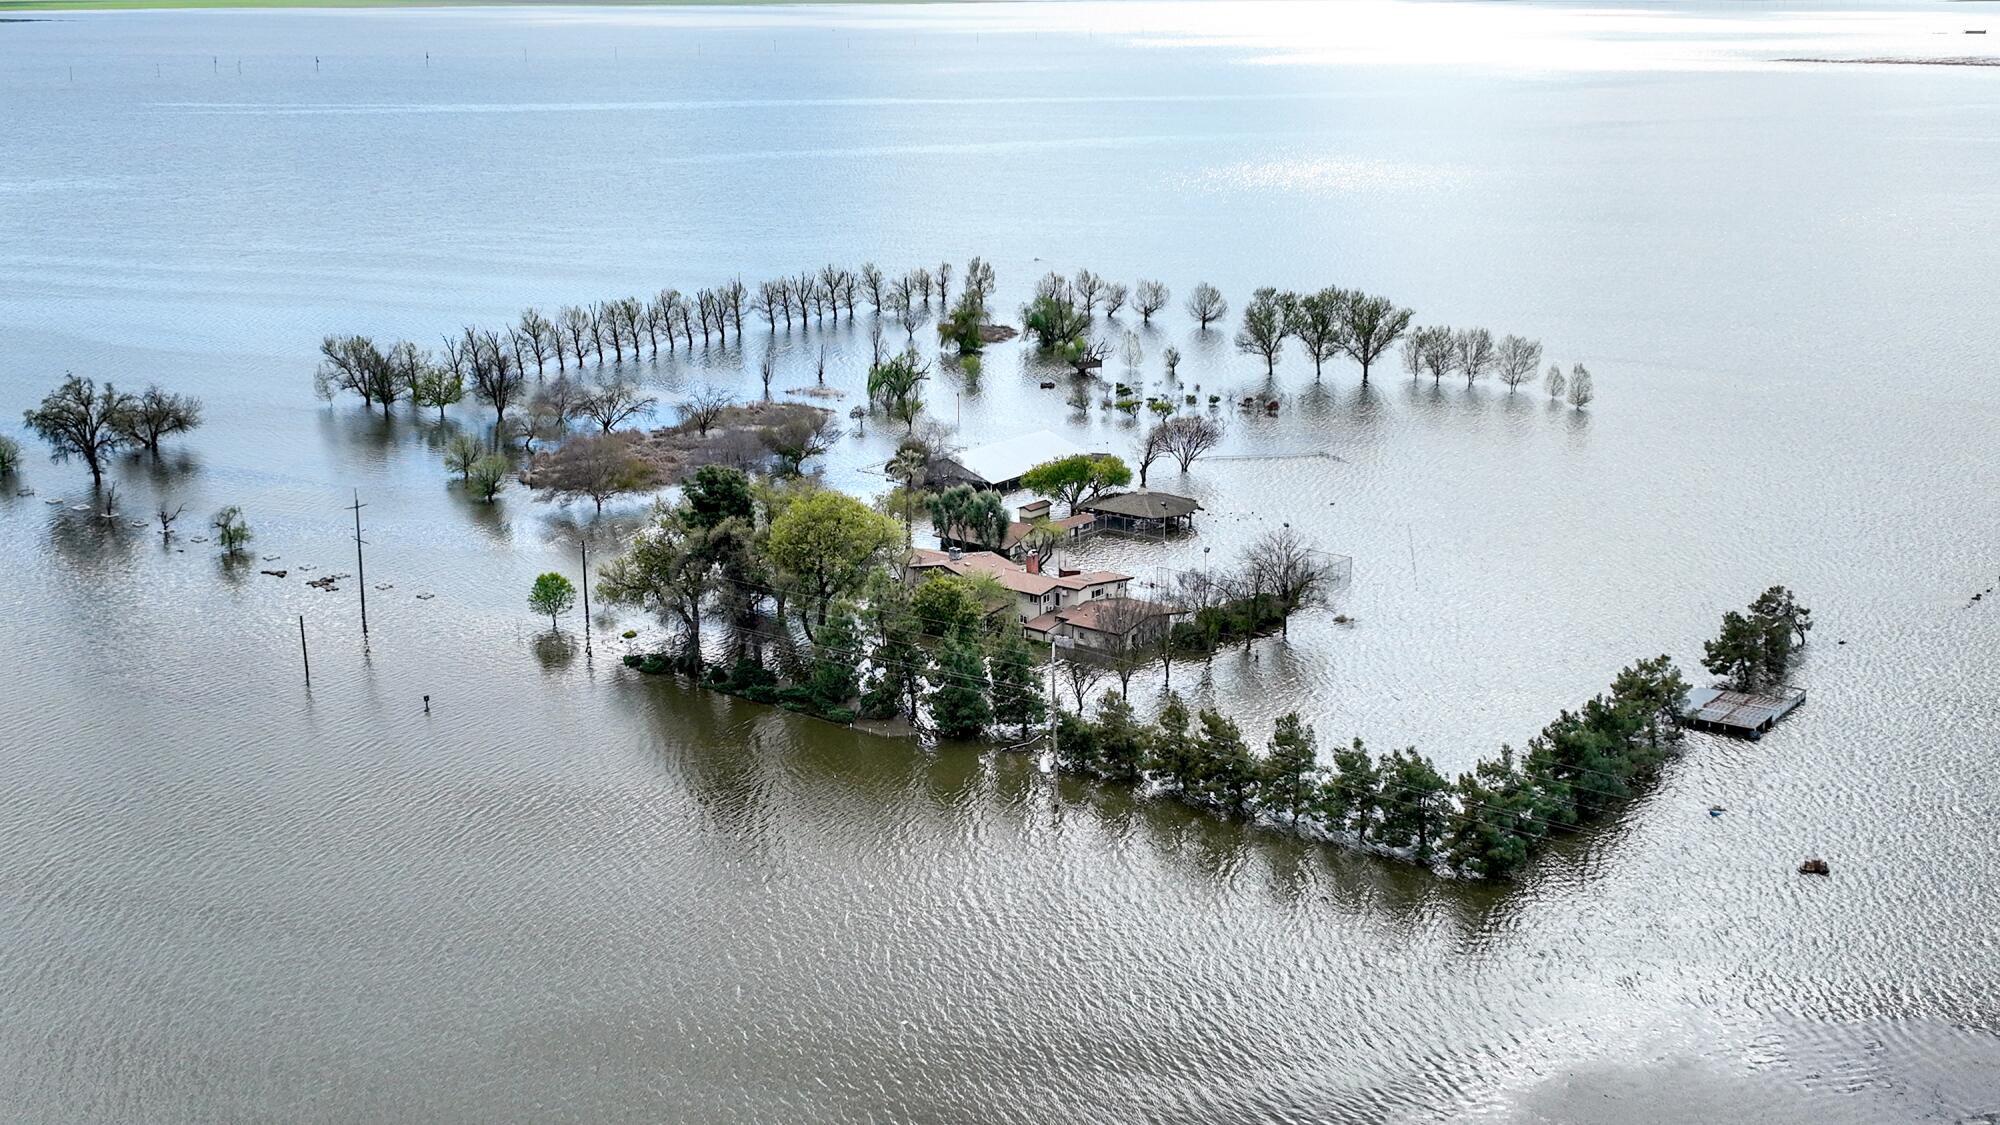 In an aerial view an estate is flooded with trees marking large rectangular property line